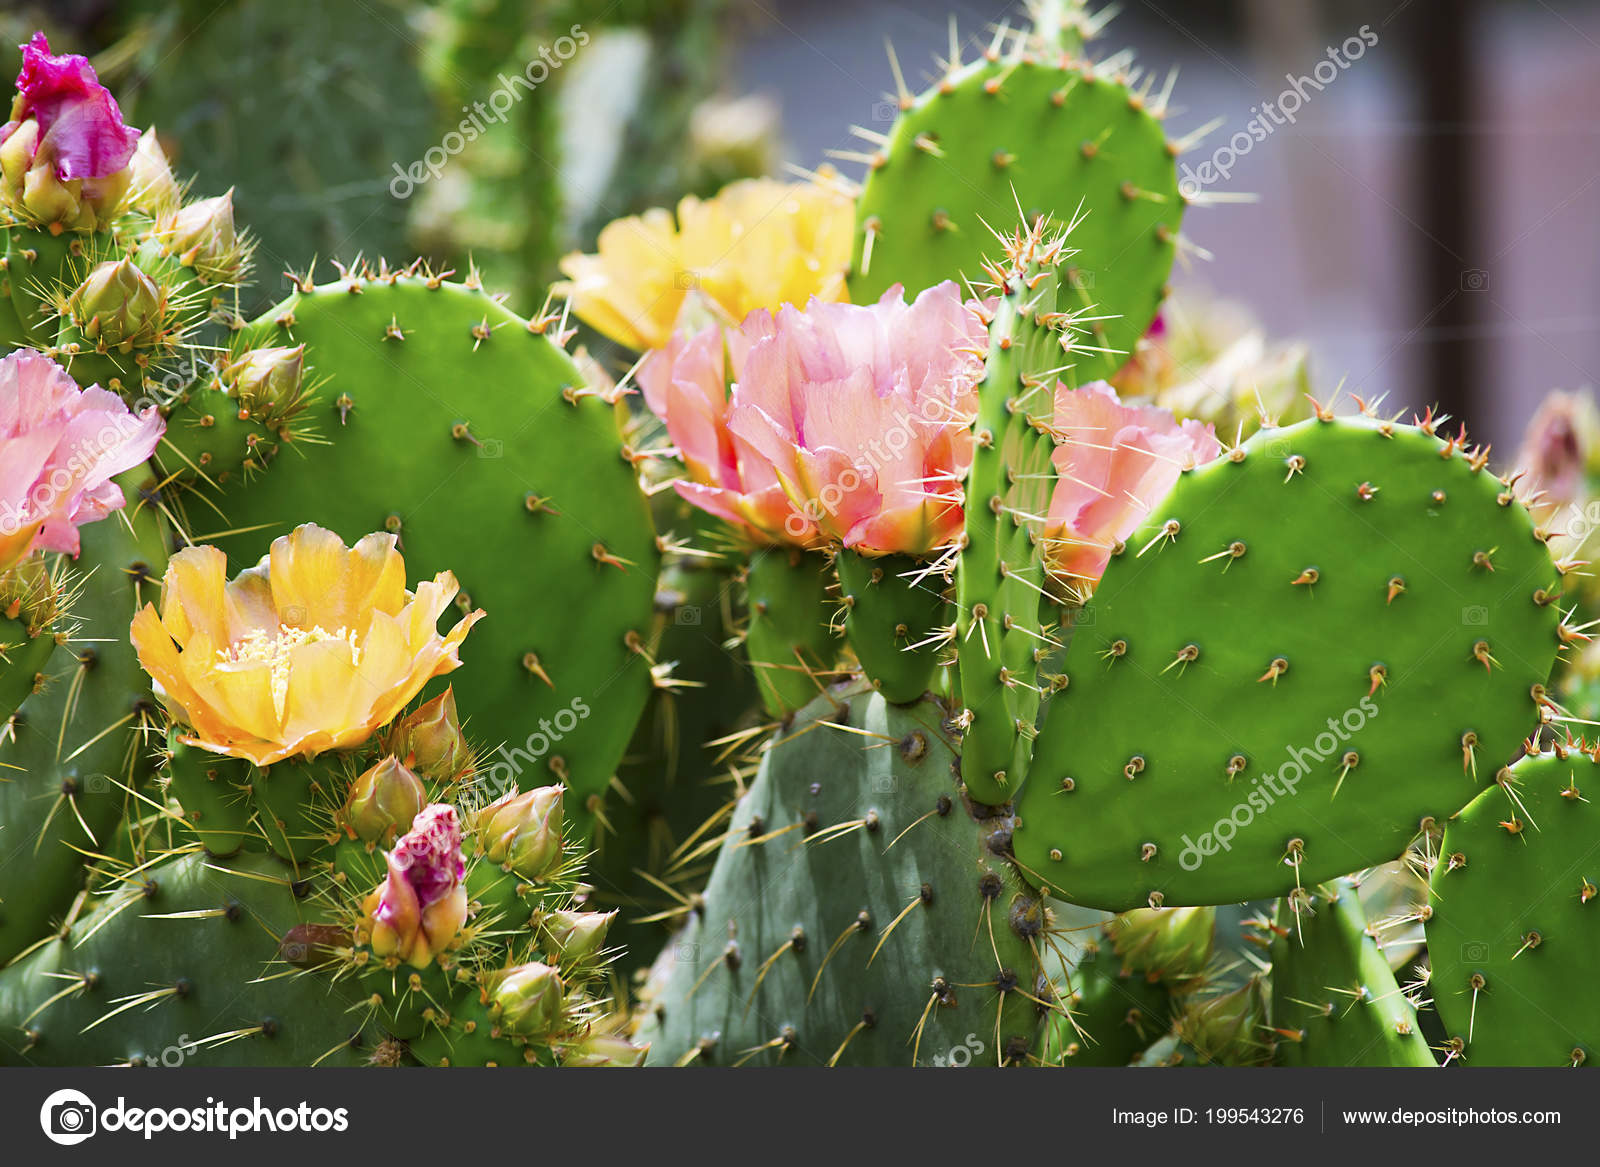 Beautiful%20Cactus%20Flower%20Garden%20Summer%20⬇%20Stock%20Photo,%20Image%20by%20©%20mikitiger%20%20#199543276